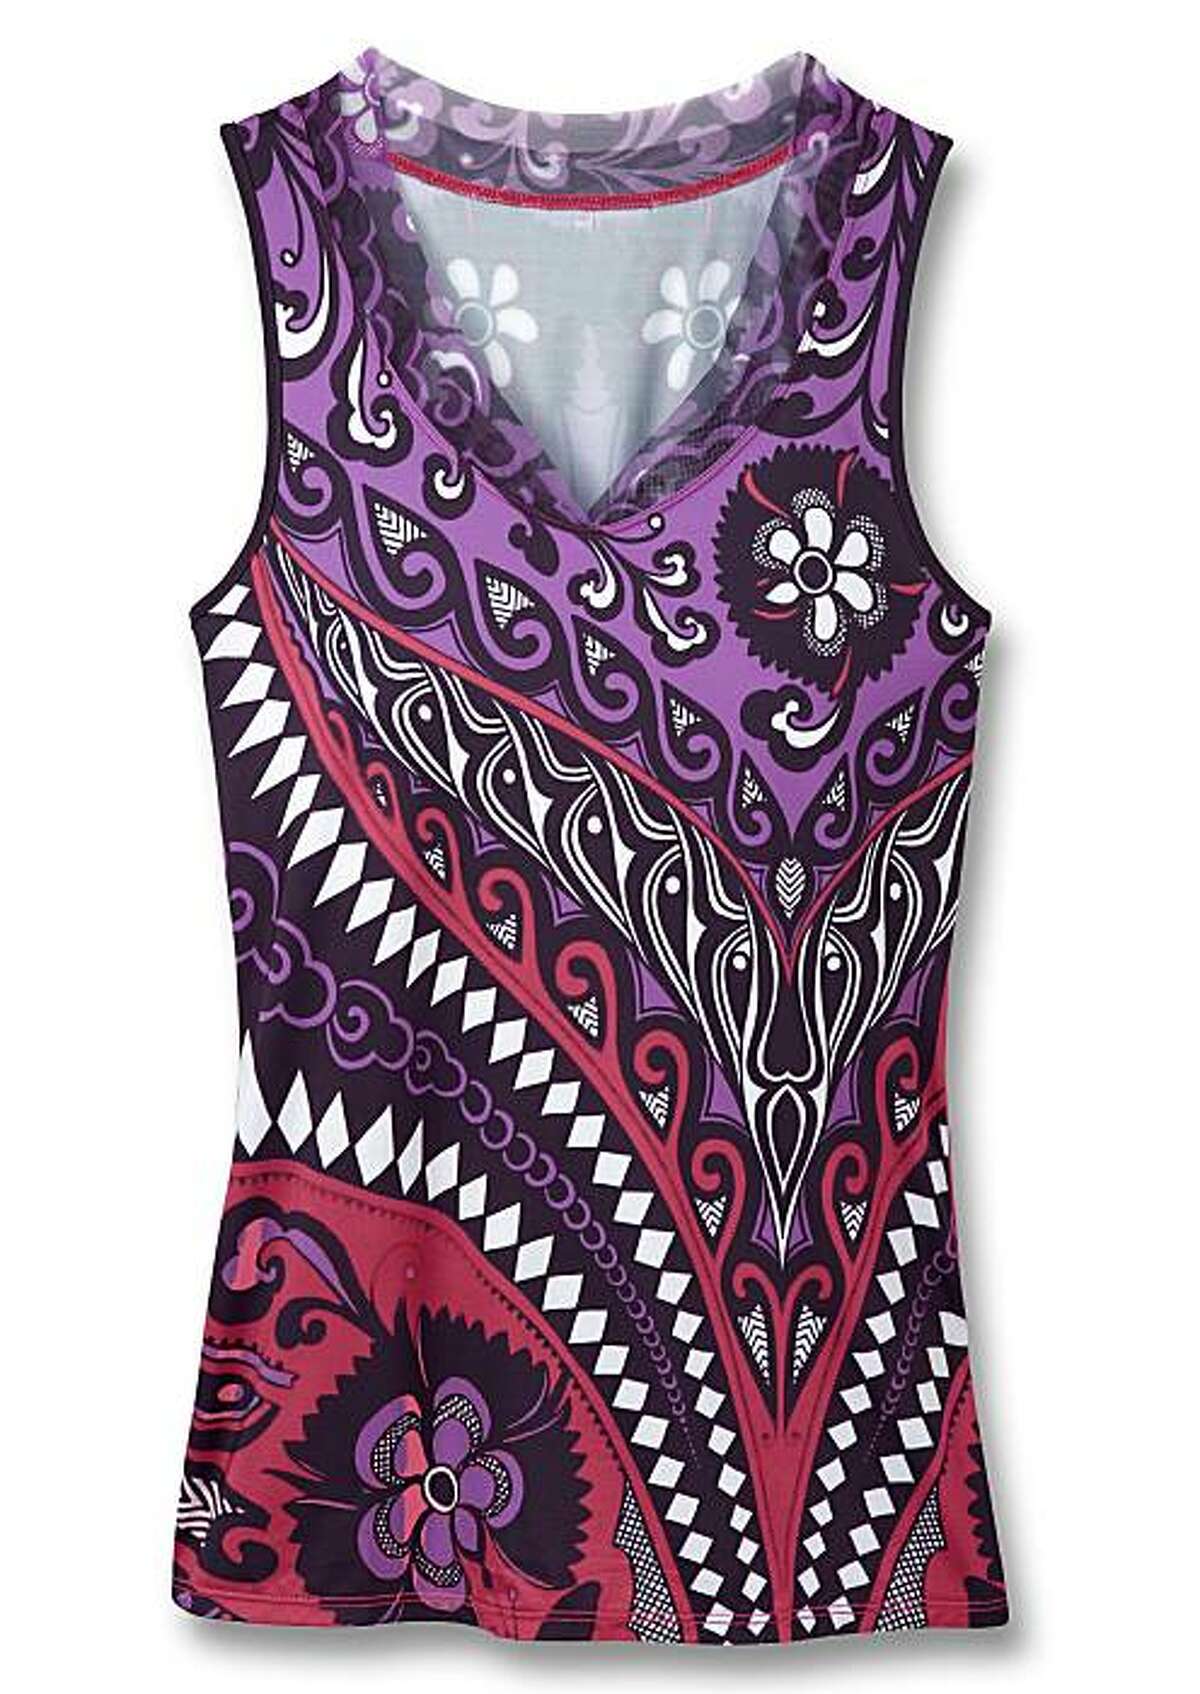 Athleta's Tattoo Mesh Neck Tank by Yellowman ($64) is available at available at the Athleta store in San Francisco and at www.athleta.com.